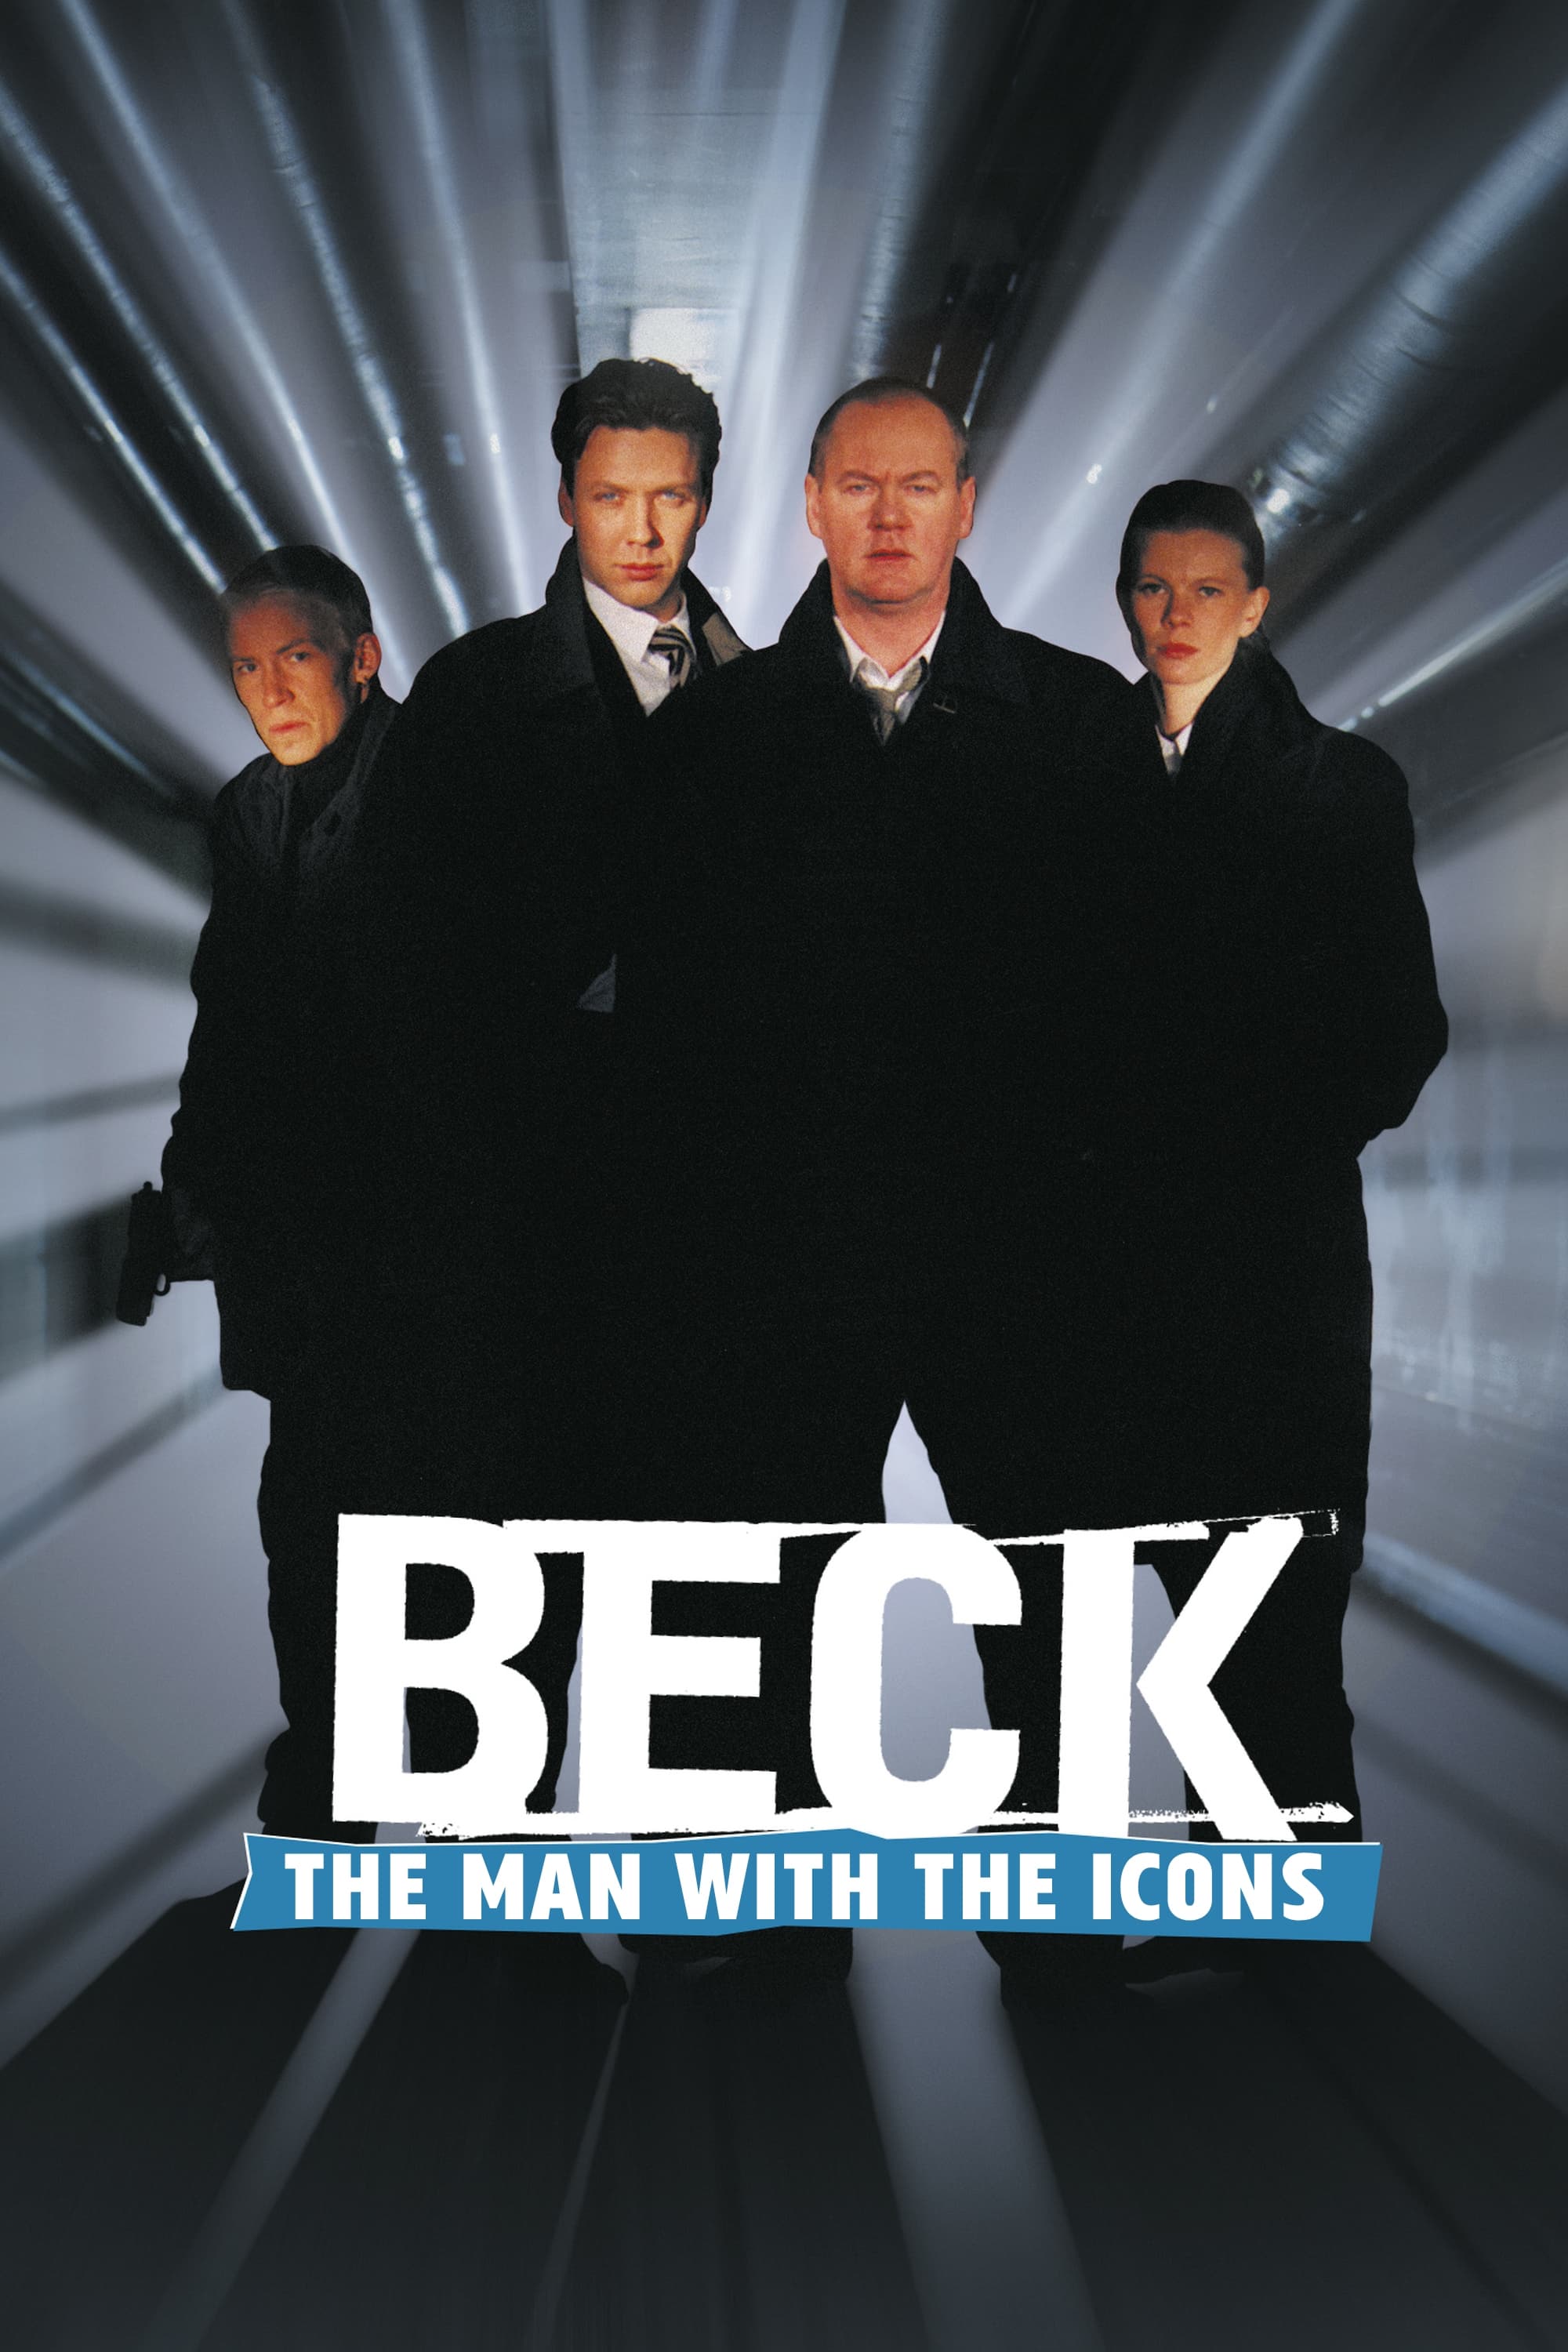 Beck - The Man with the Icons (1997)